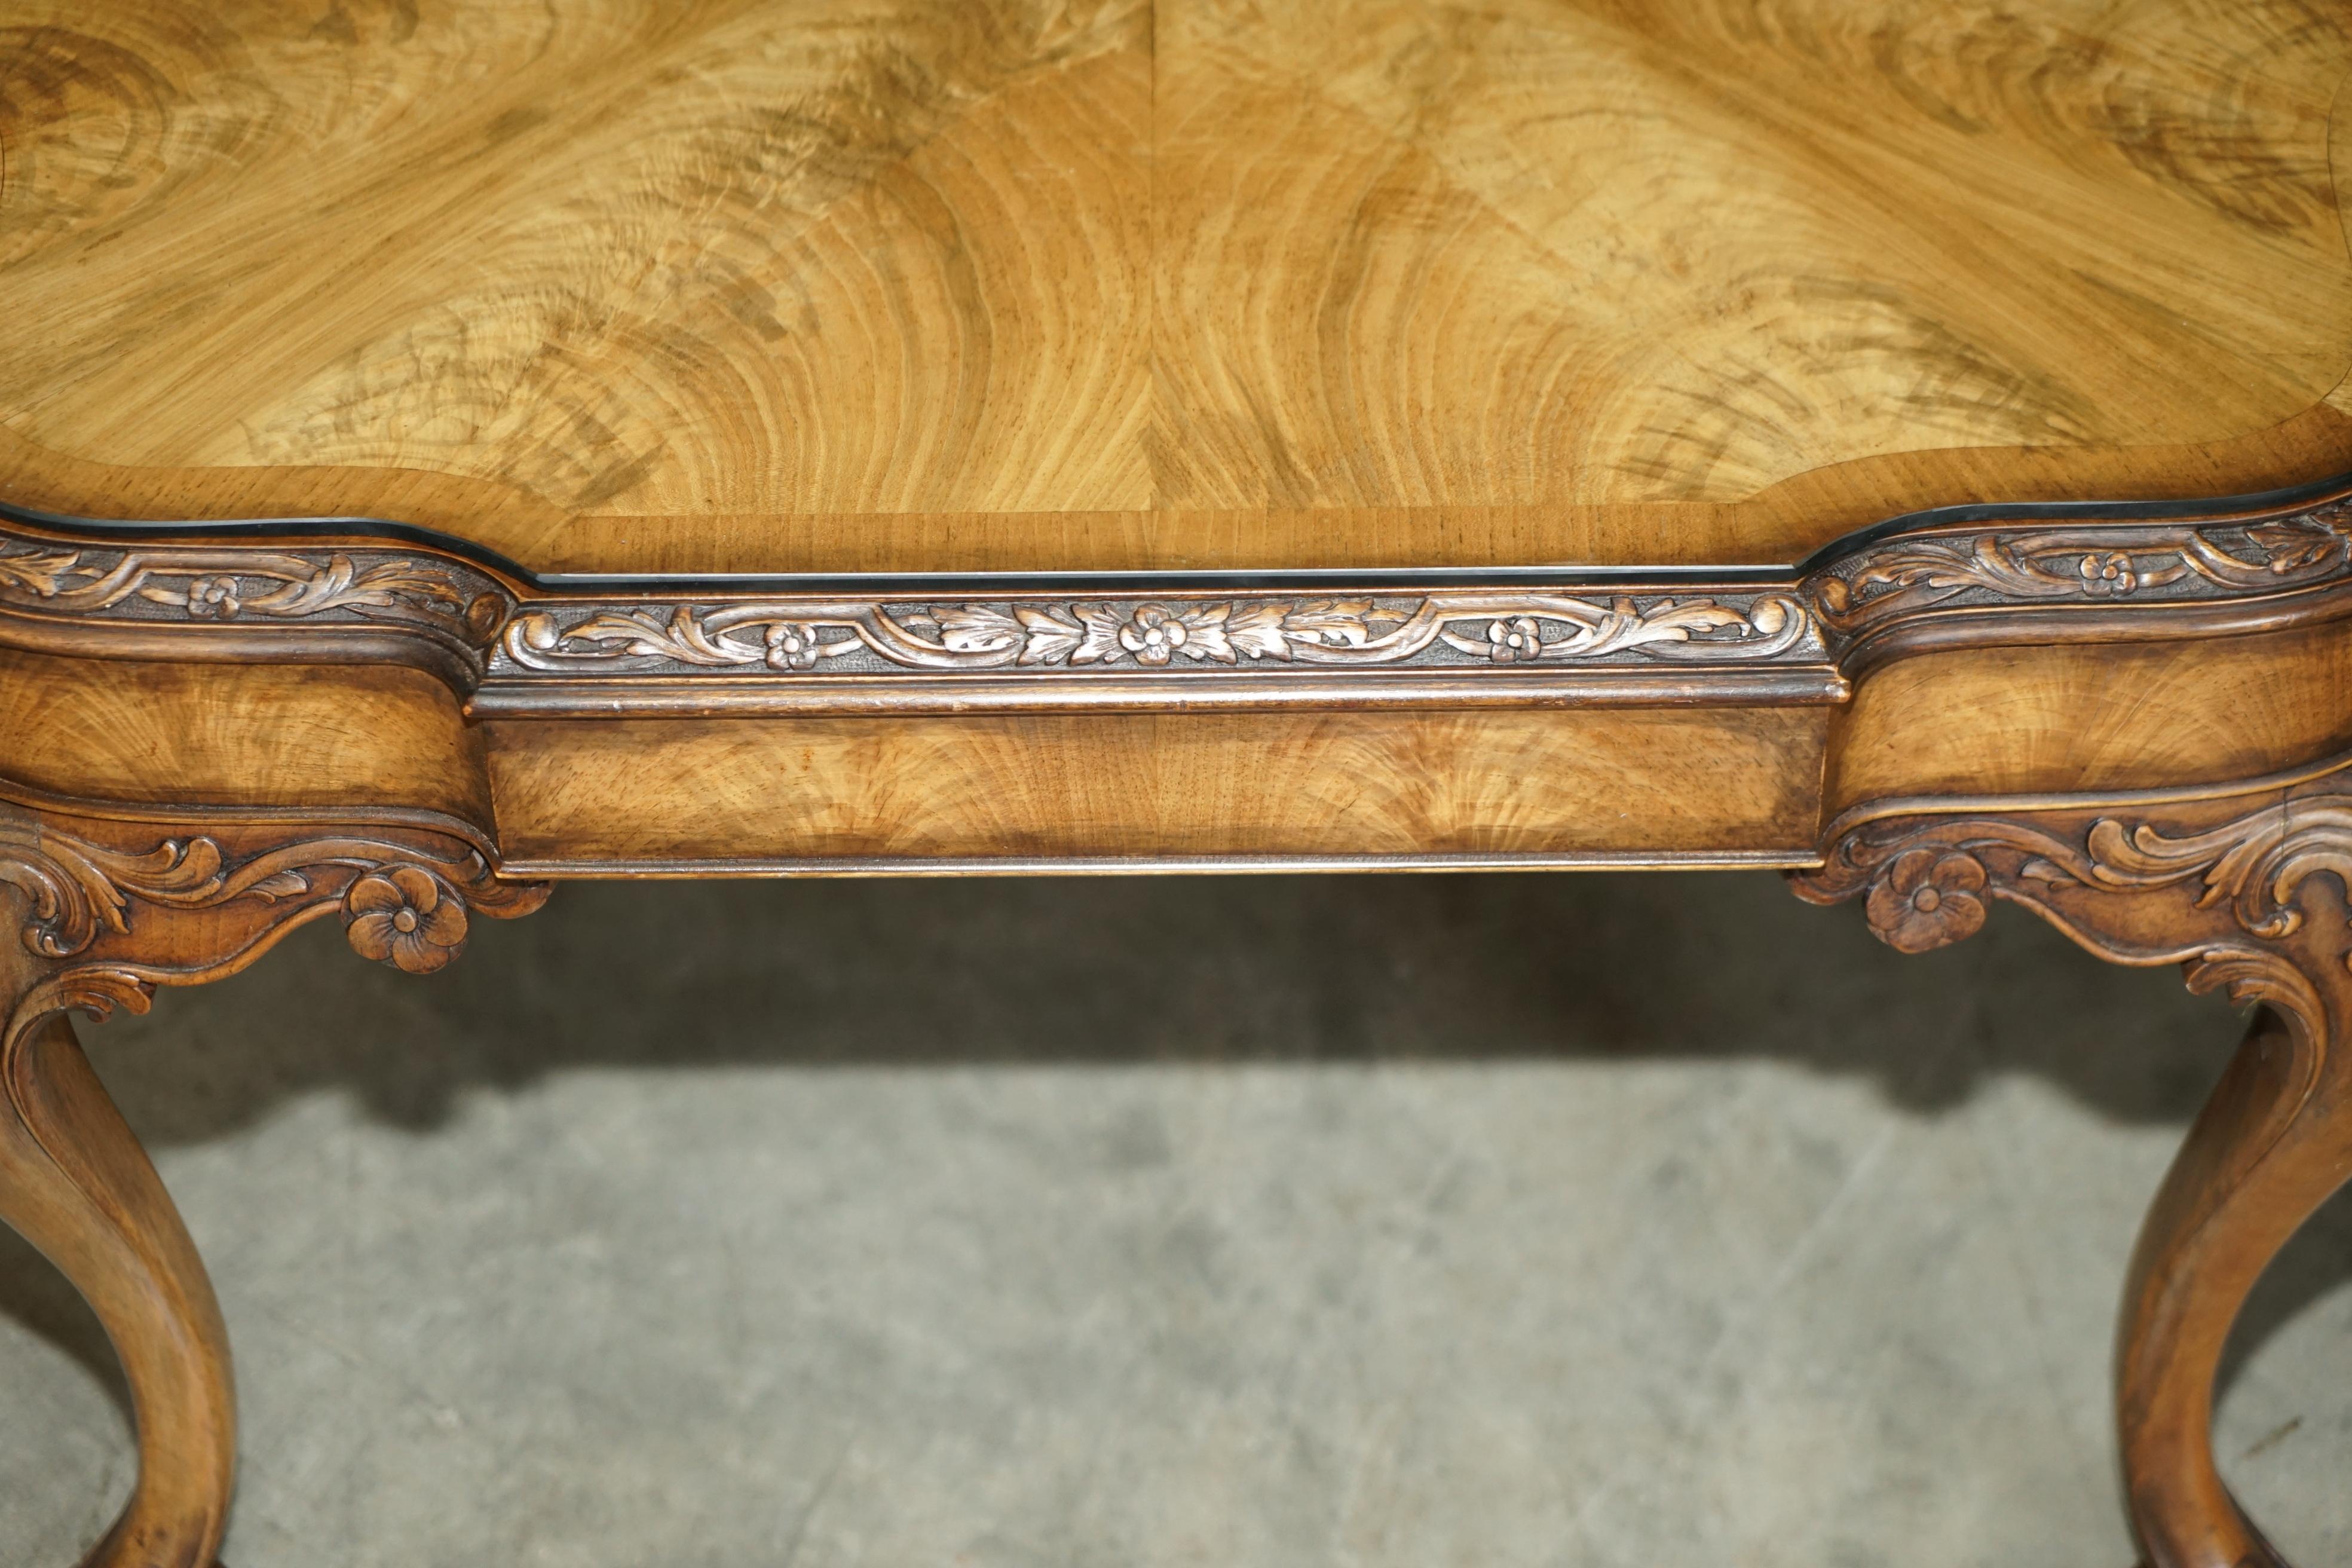 Exquisite Burr Walnut Coffee Cocktail Table with Ornately Carved Cabriole Legs For Sale 3